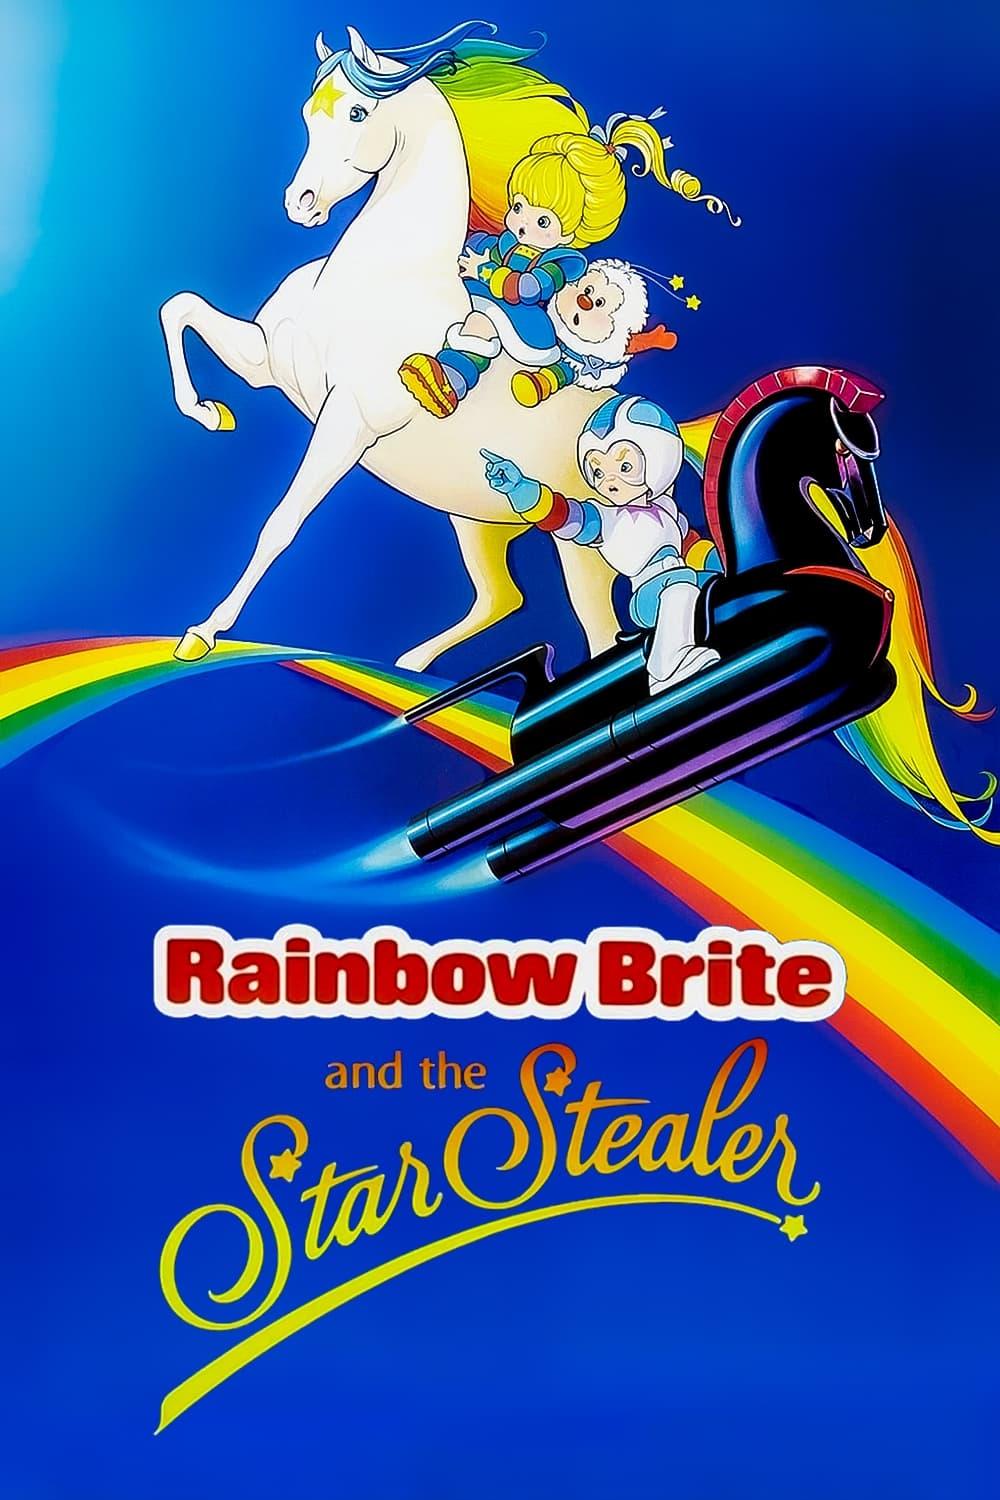 Rainbow Brite and the Star Stealer poster